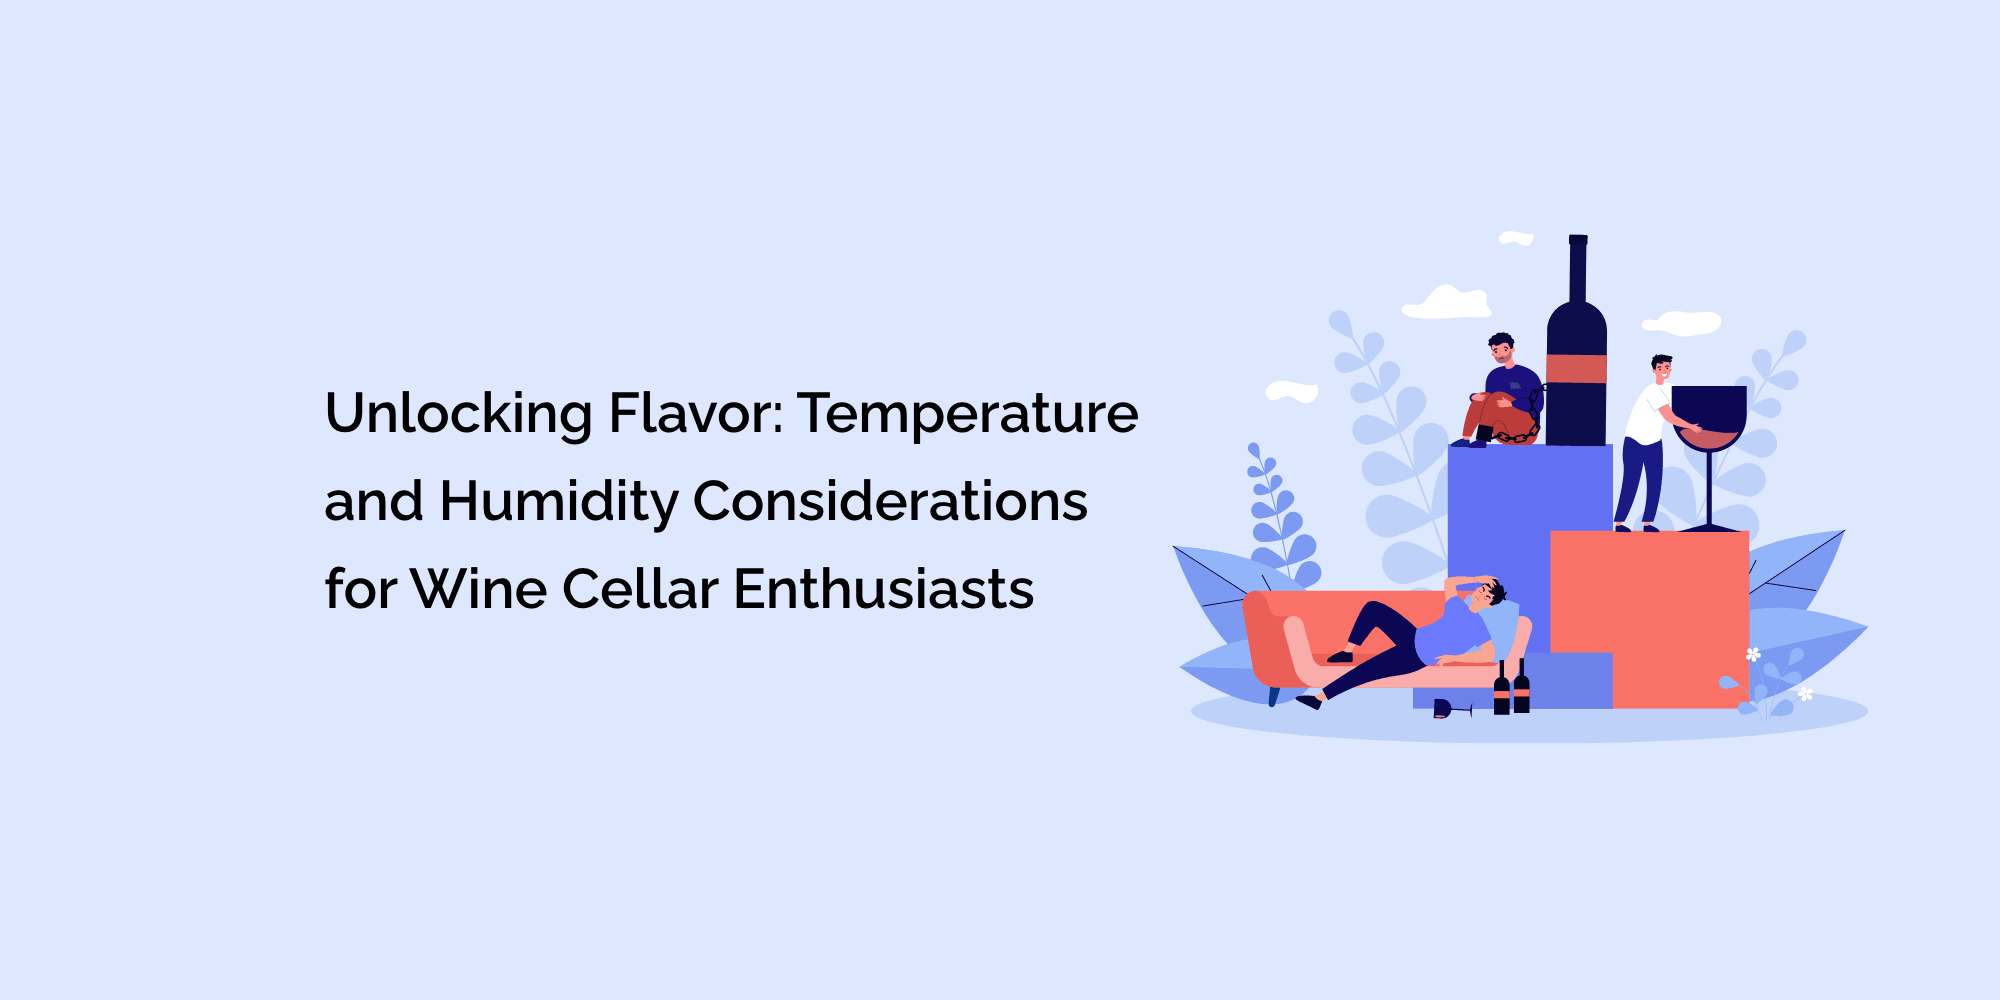 Unlocking Flavor: Temperature and Humidity Considerations for Wine Cellar Enthusiasts